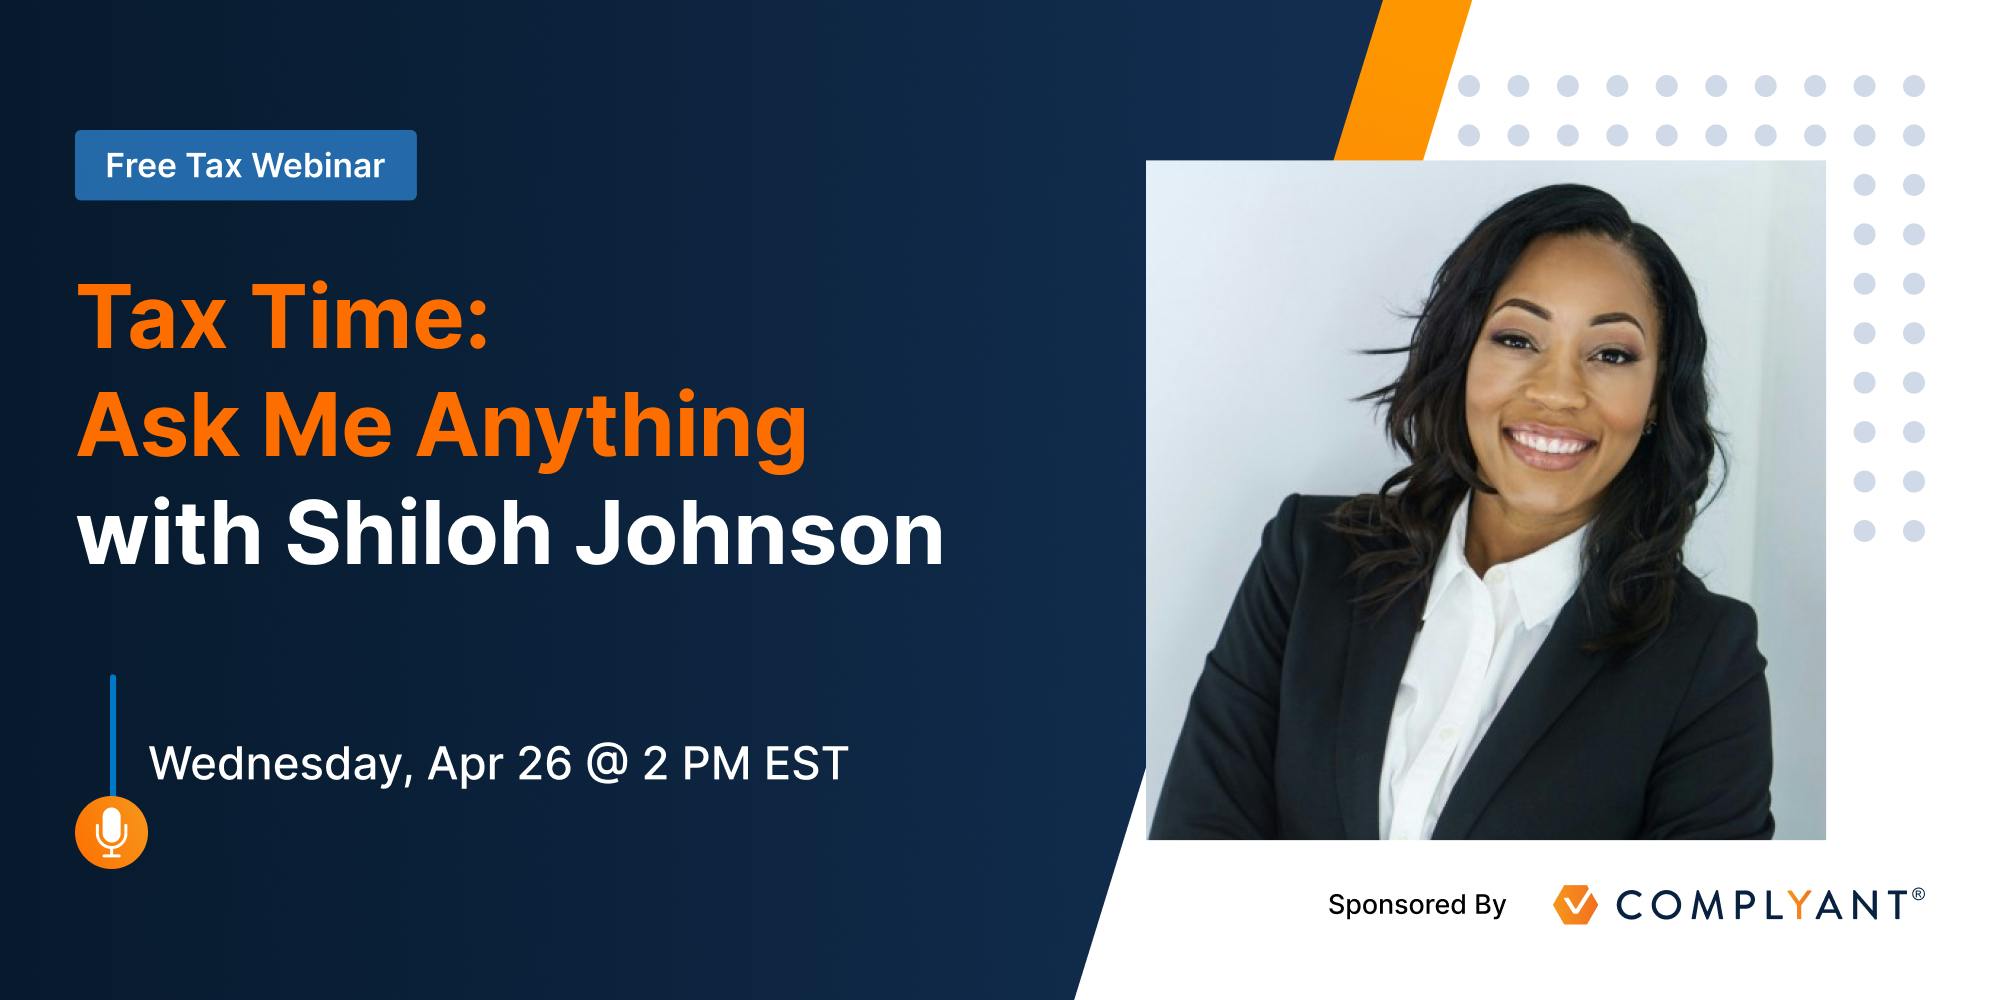 Tax Time: Ask me Anything with Shiloh Johnson